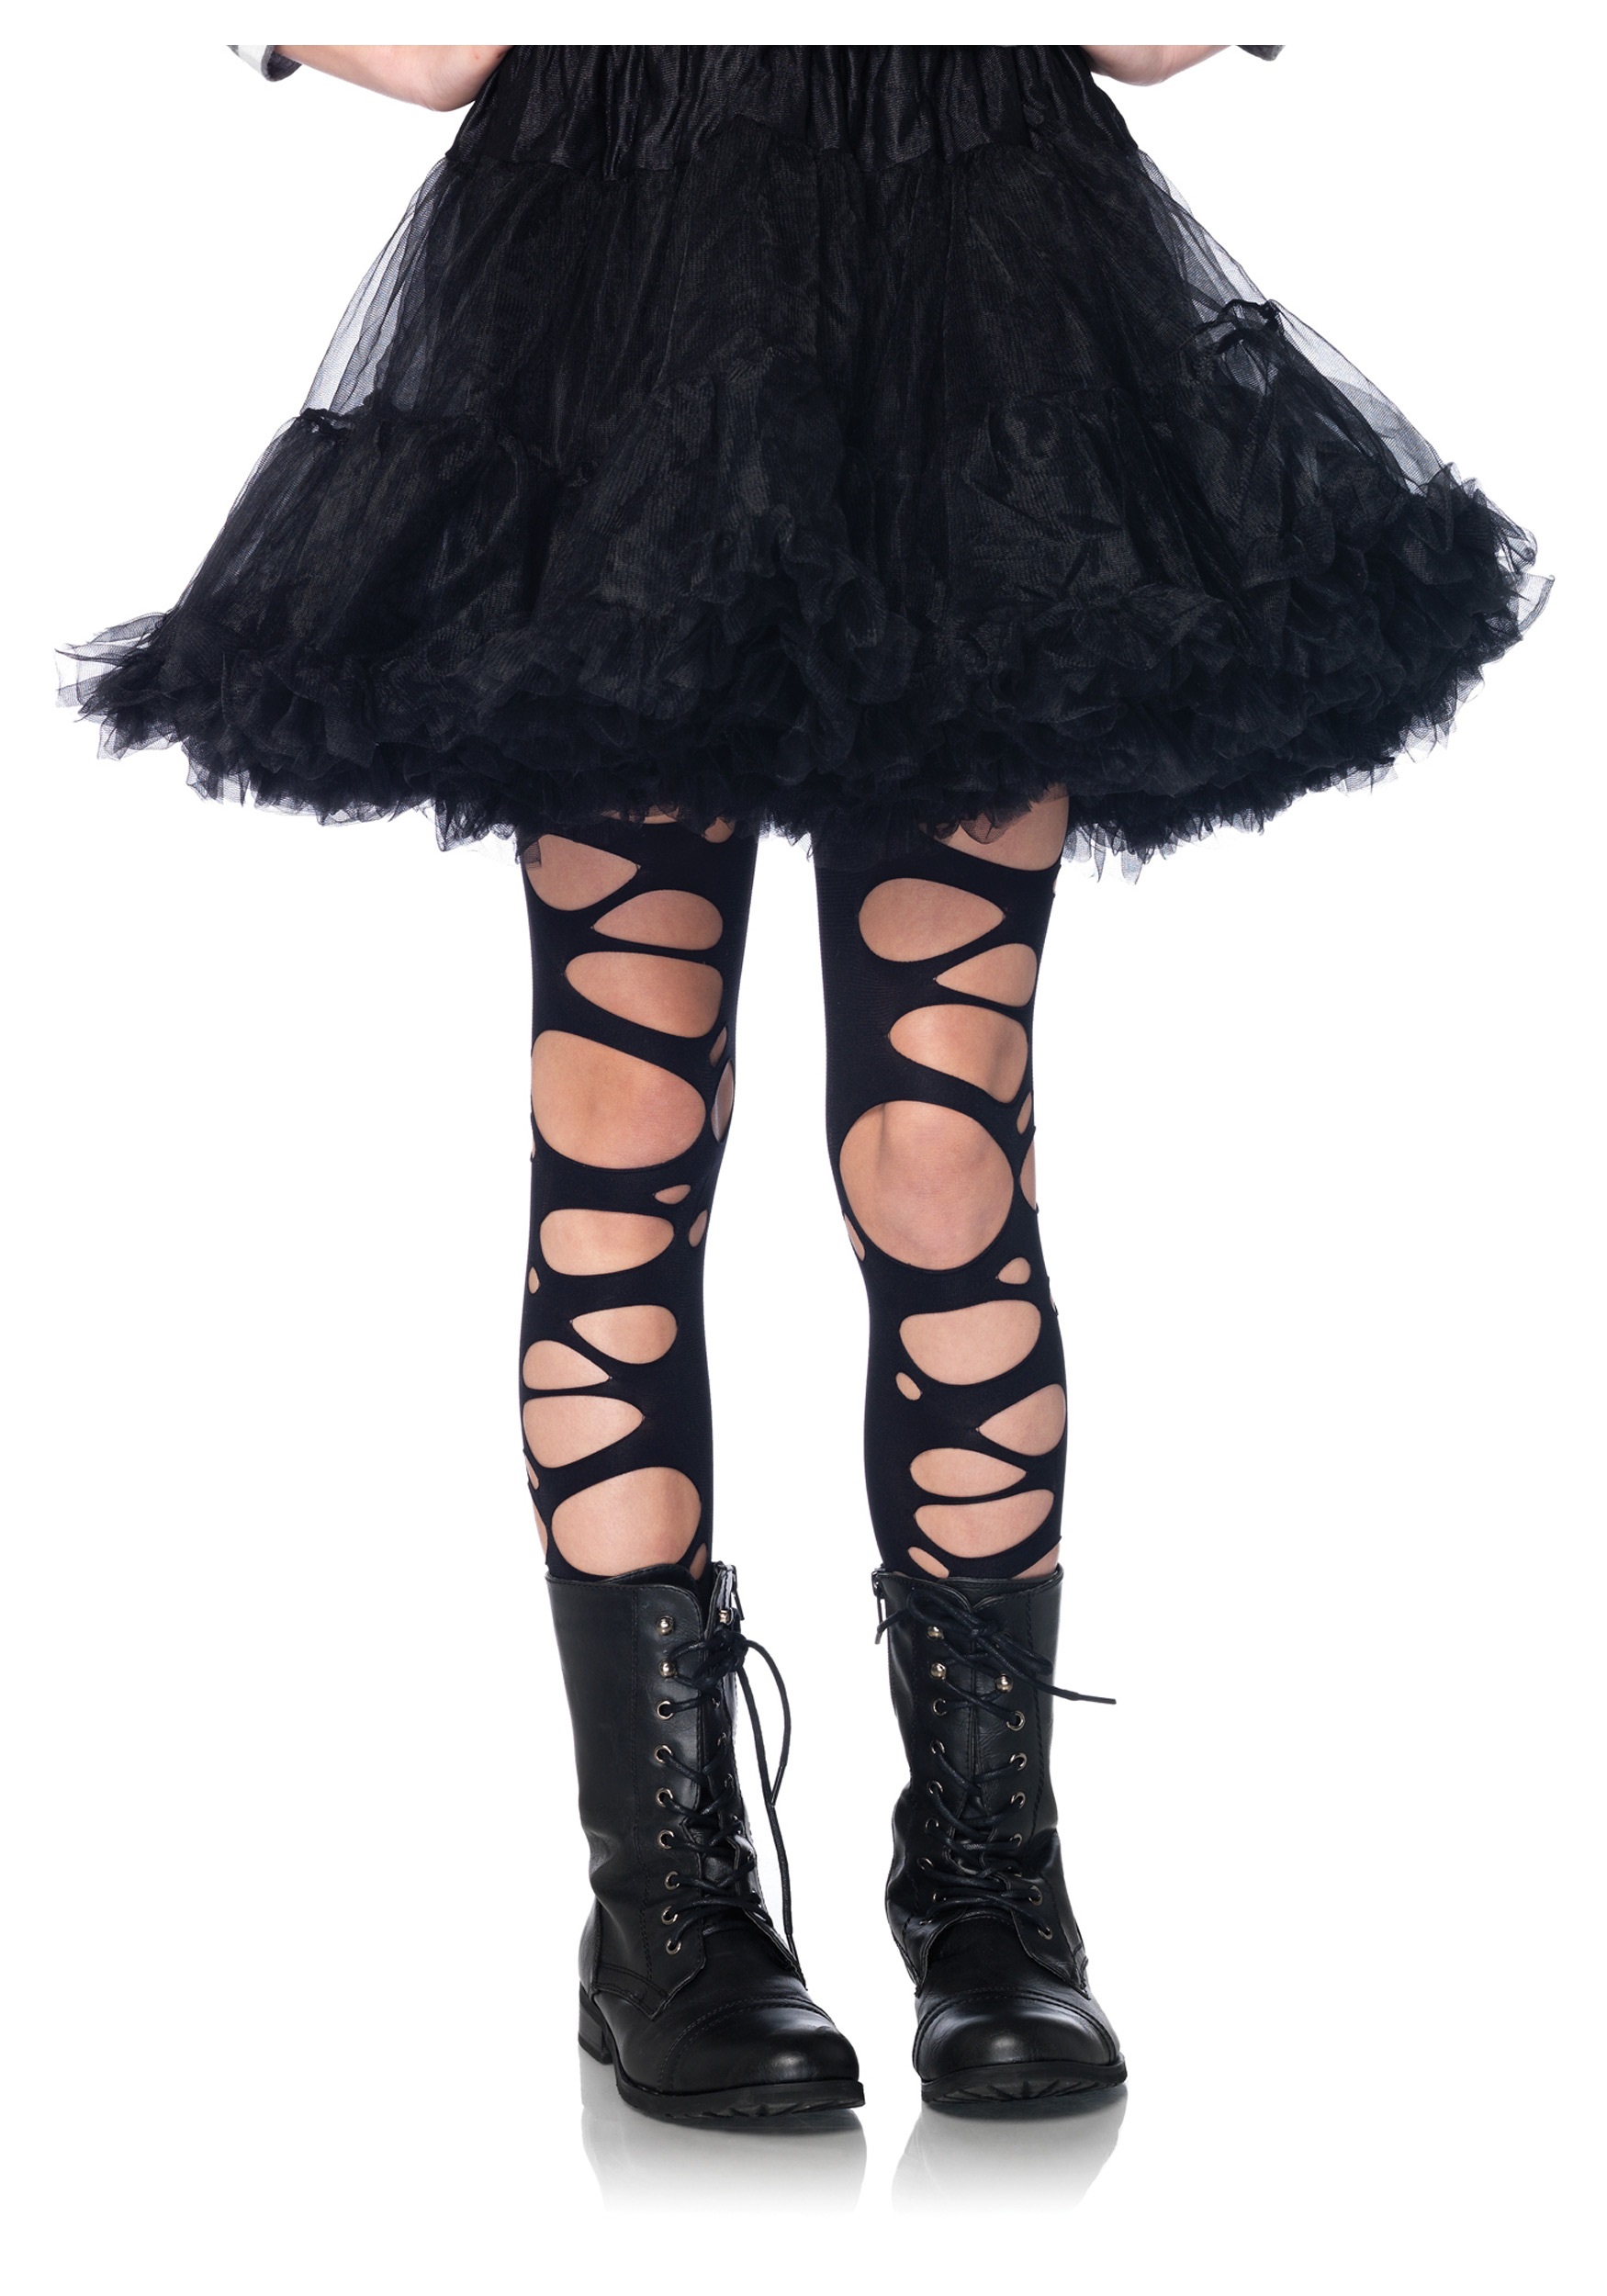 https://images.fun.com/products/13796/1-1/girls-tattered-gothic-tights.jpg